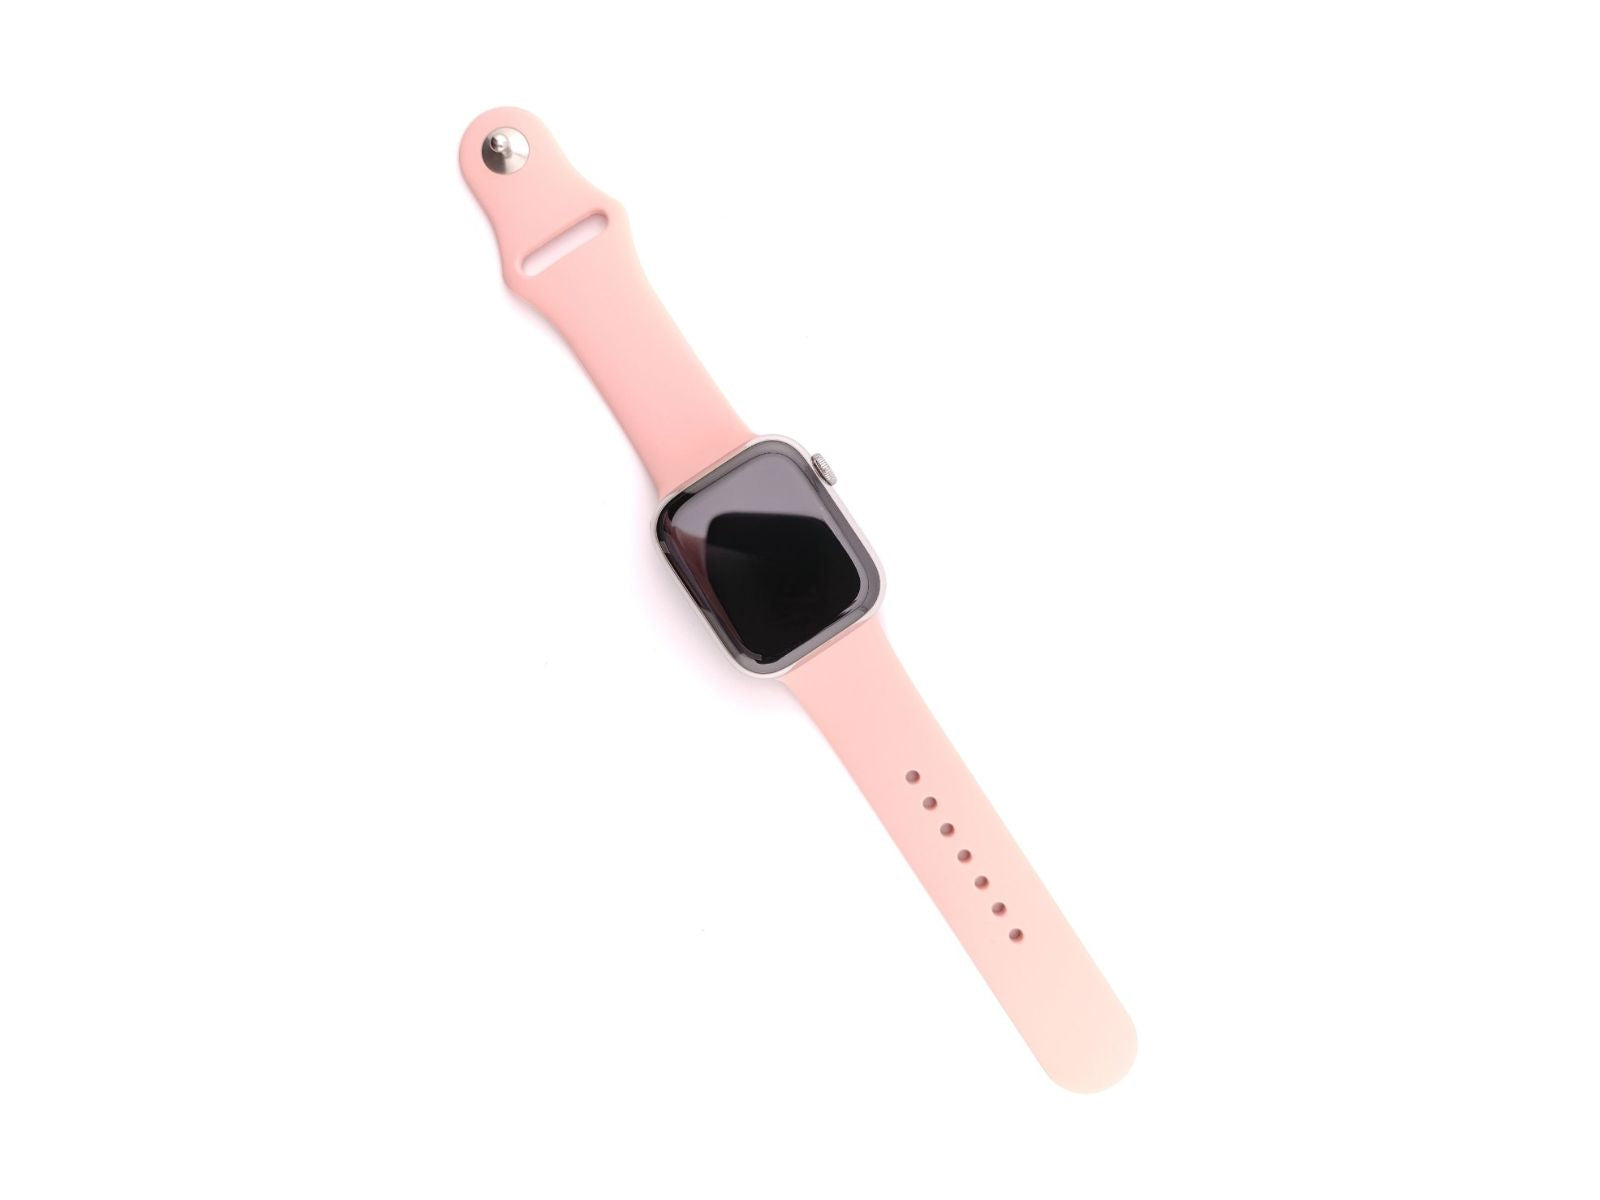 Apple Watch Strap on a watch In Pink